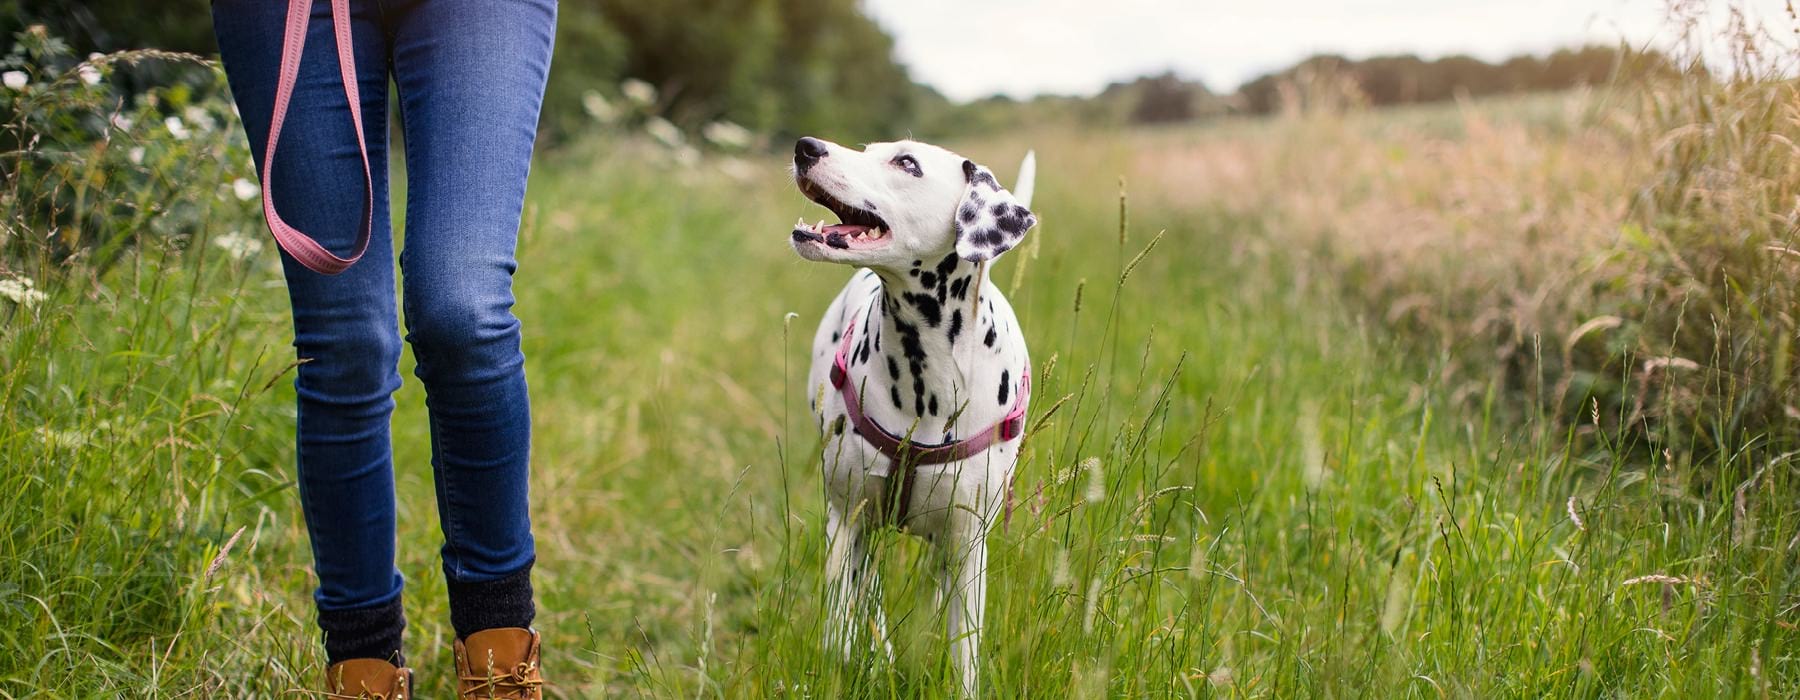 dalmation pup and master walking in a field of tall grass